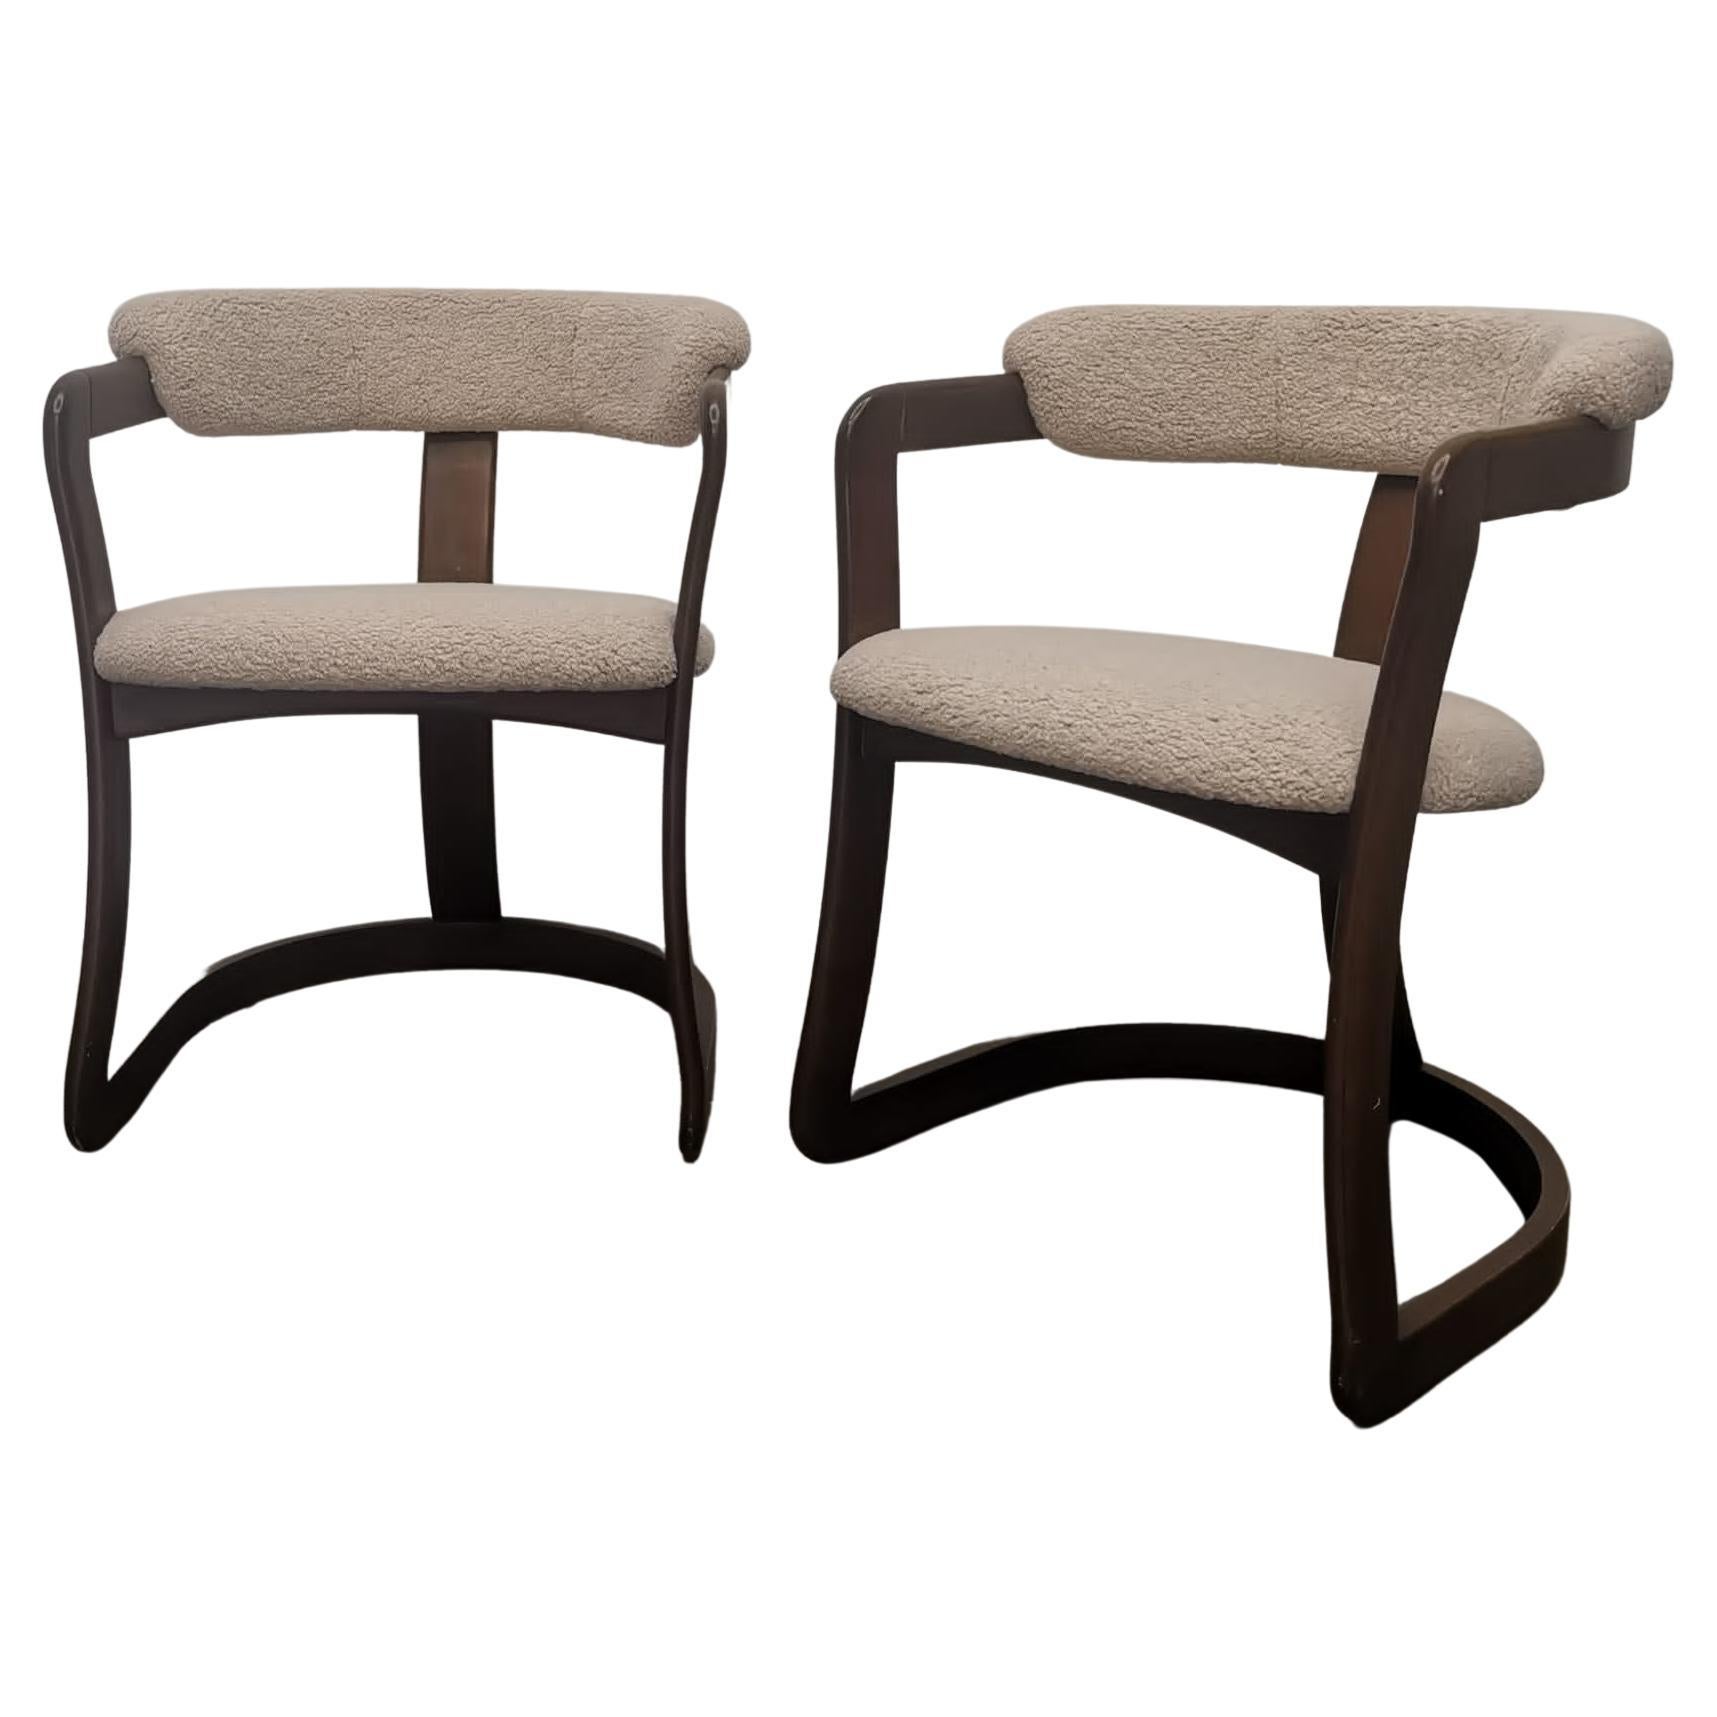 Set of 2 Pamplona style Italian dining chairs For Sale